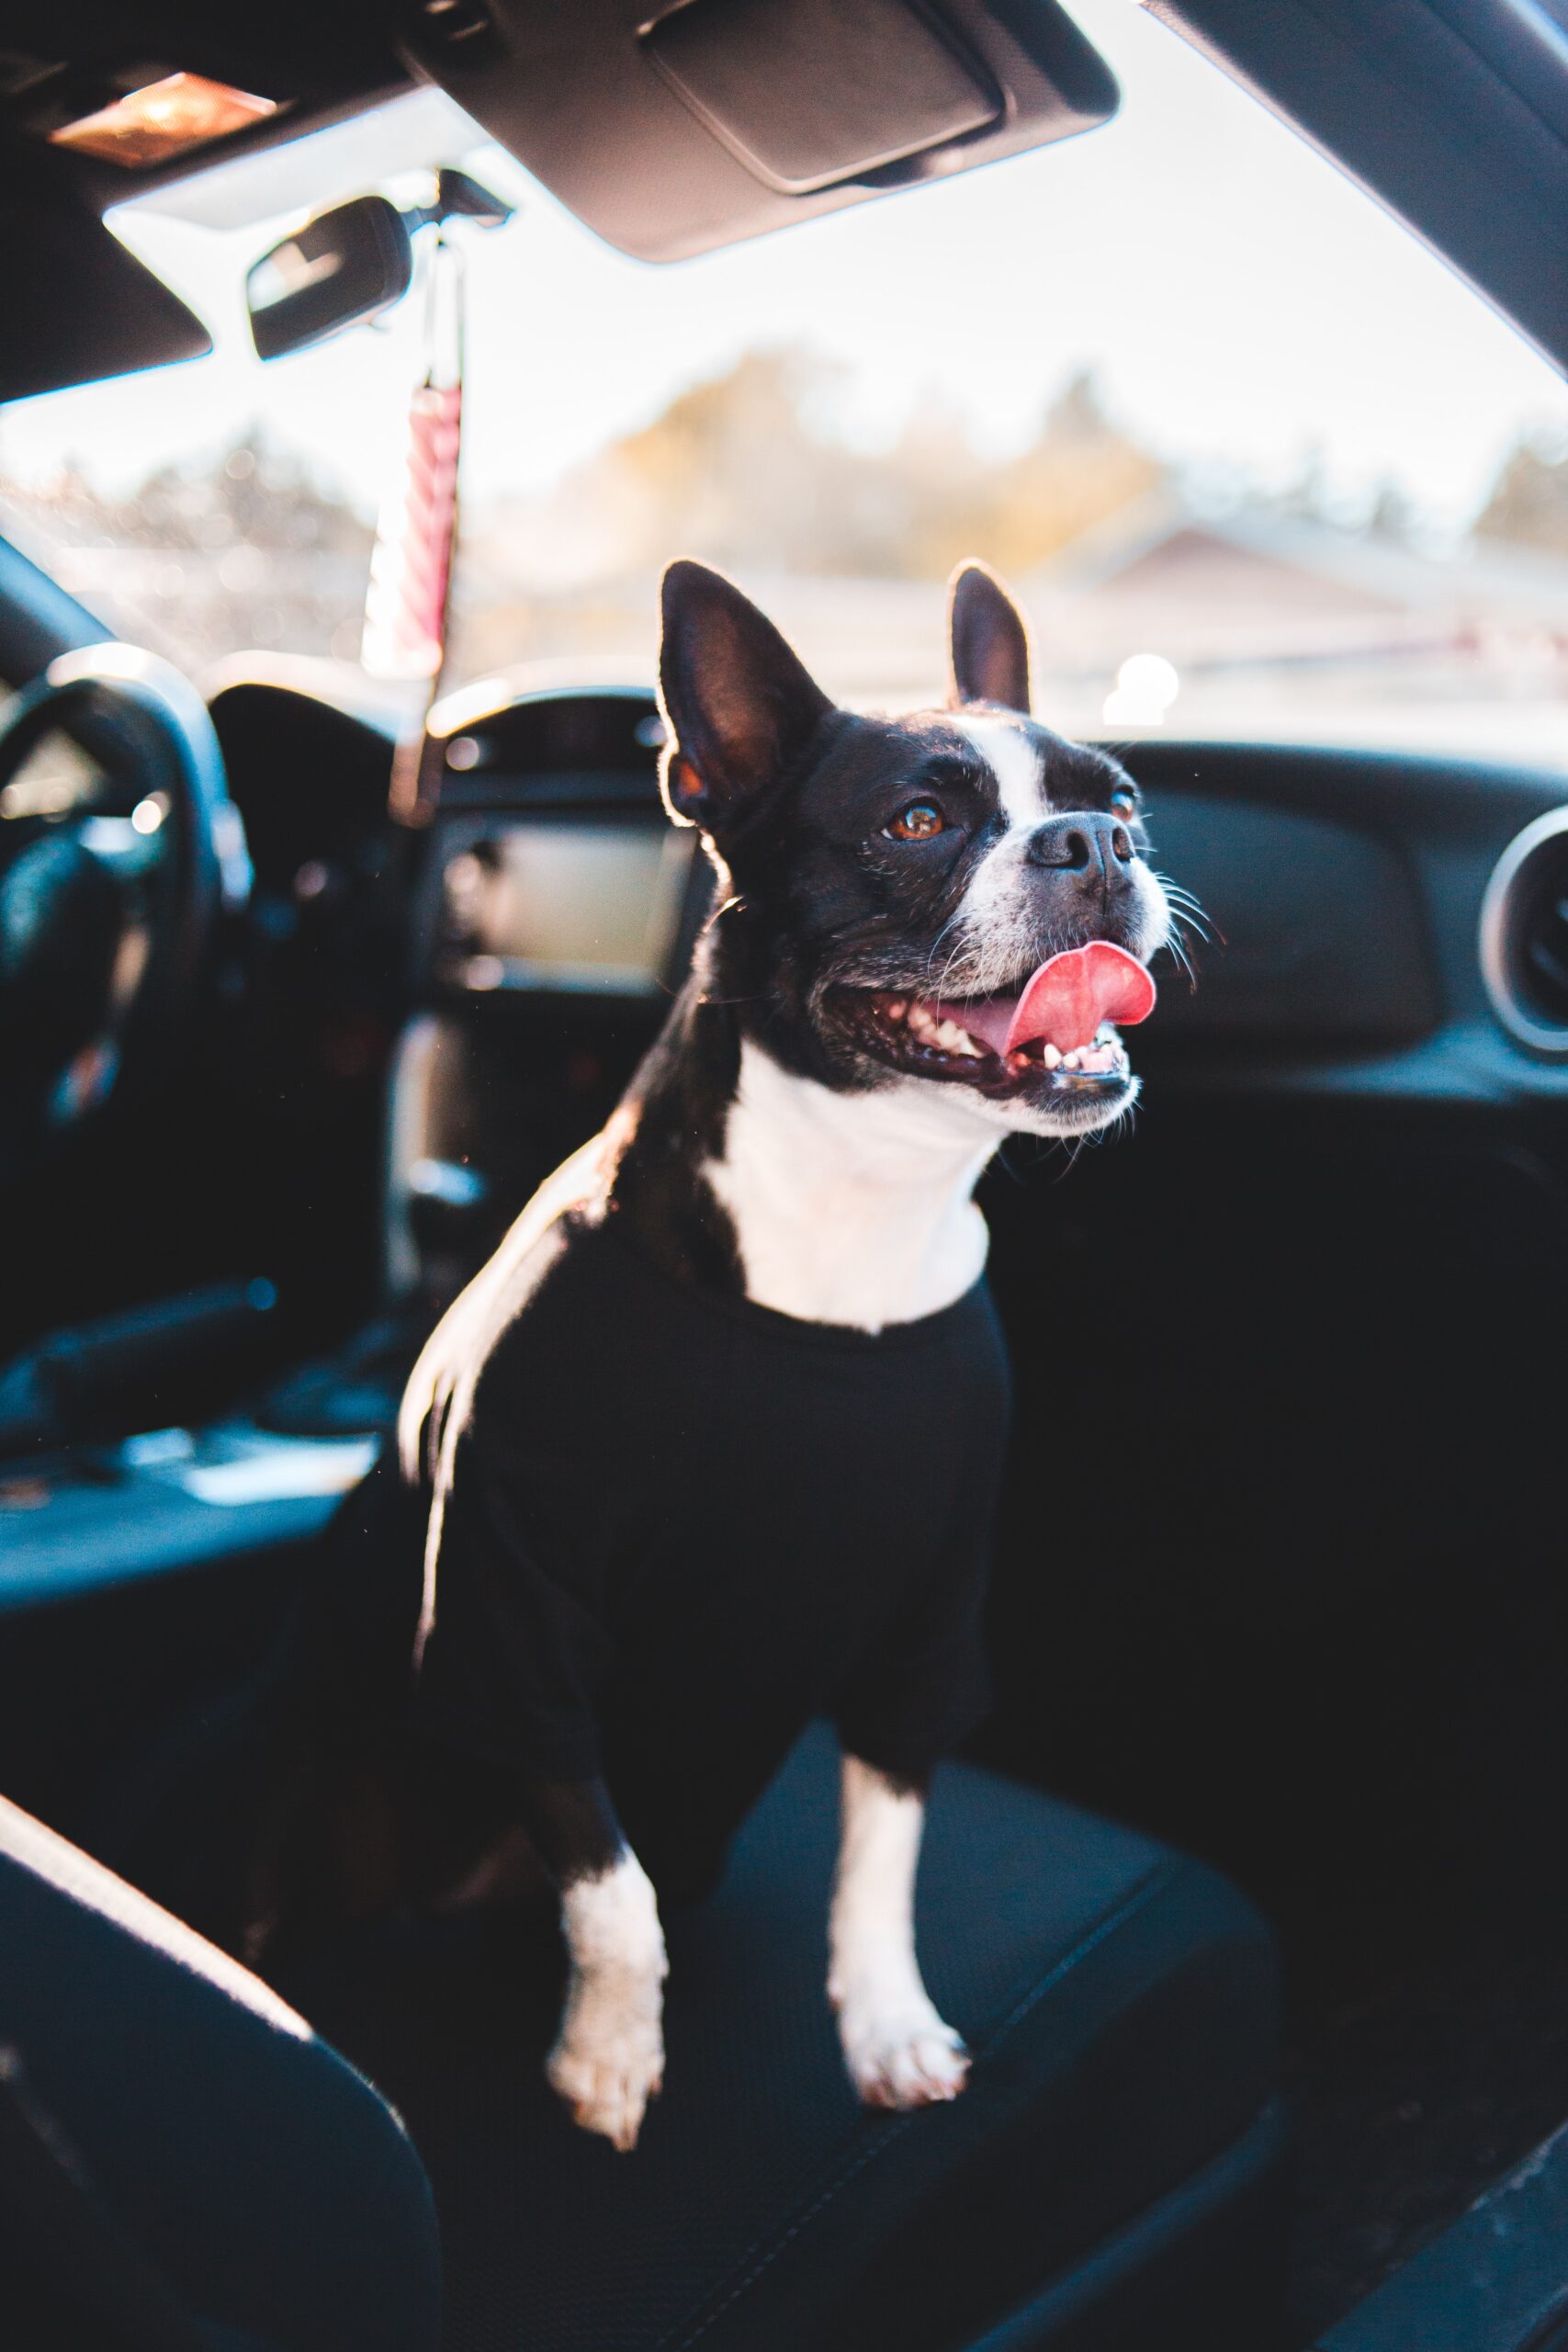 Has Someone Else’s Dog Caused You To Wreck? Learn What Florida’s Strict Liability Laws Have To Say About Who Is At Fault